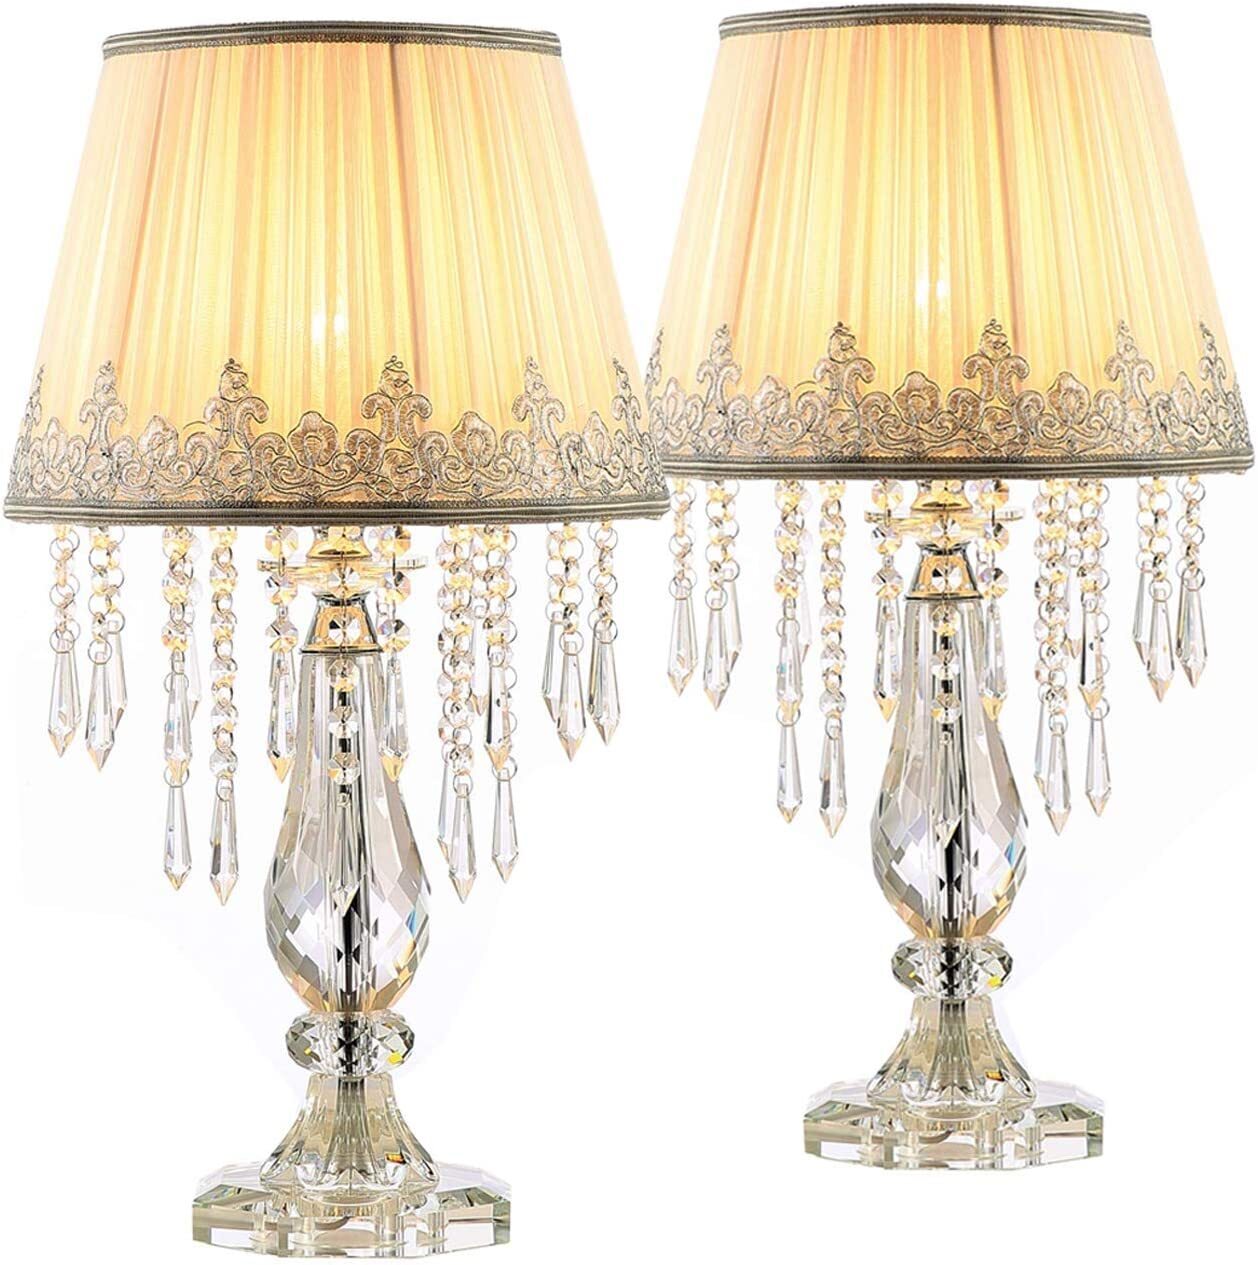 Vintage Crystal Lamps With Prisms and Fabric Shades